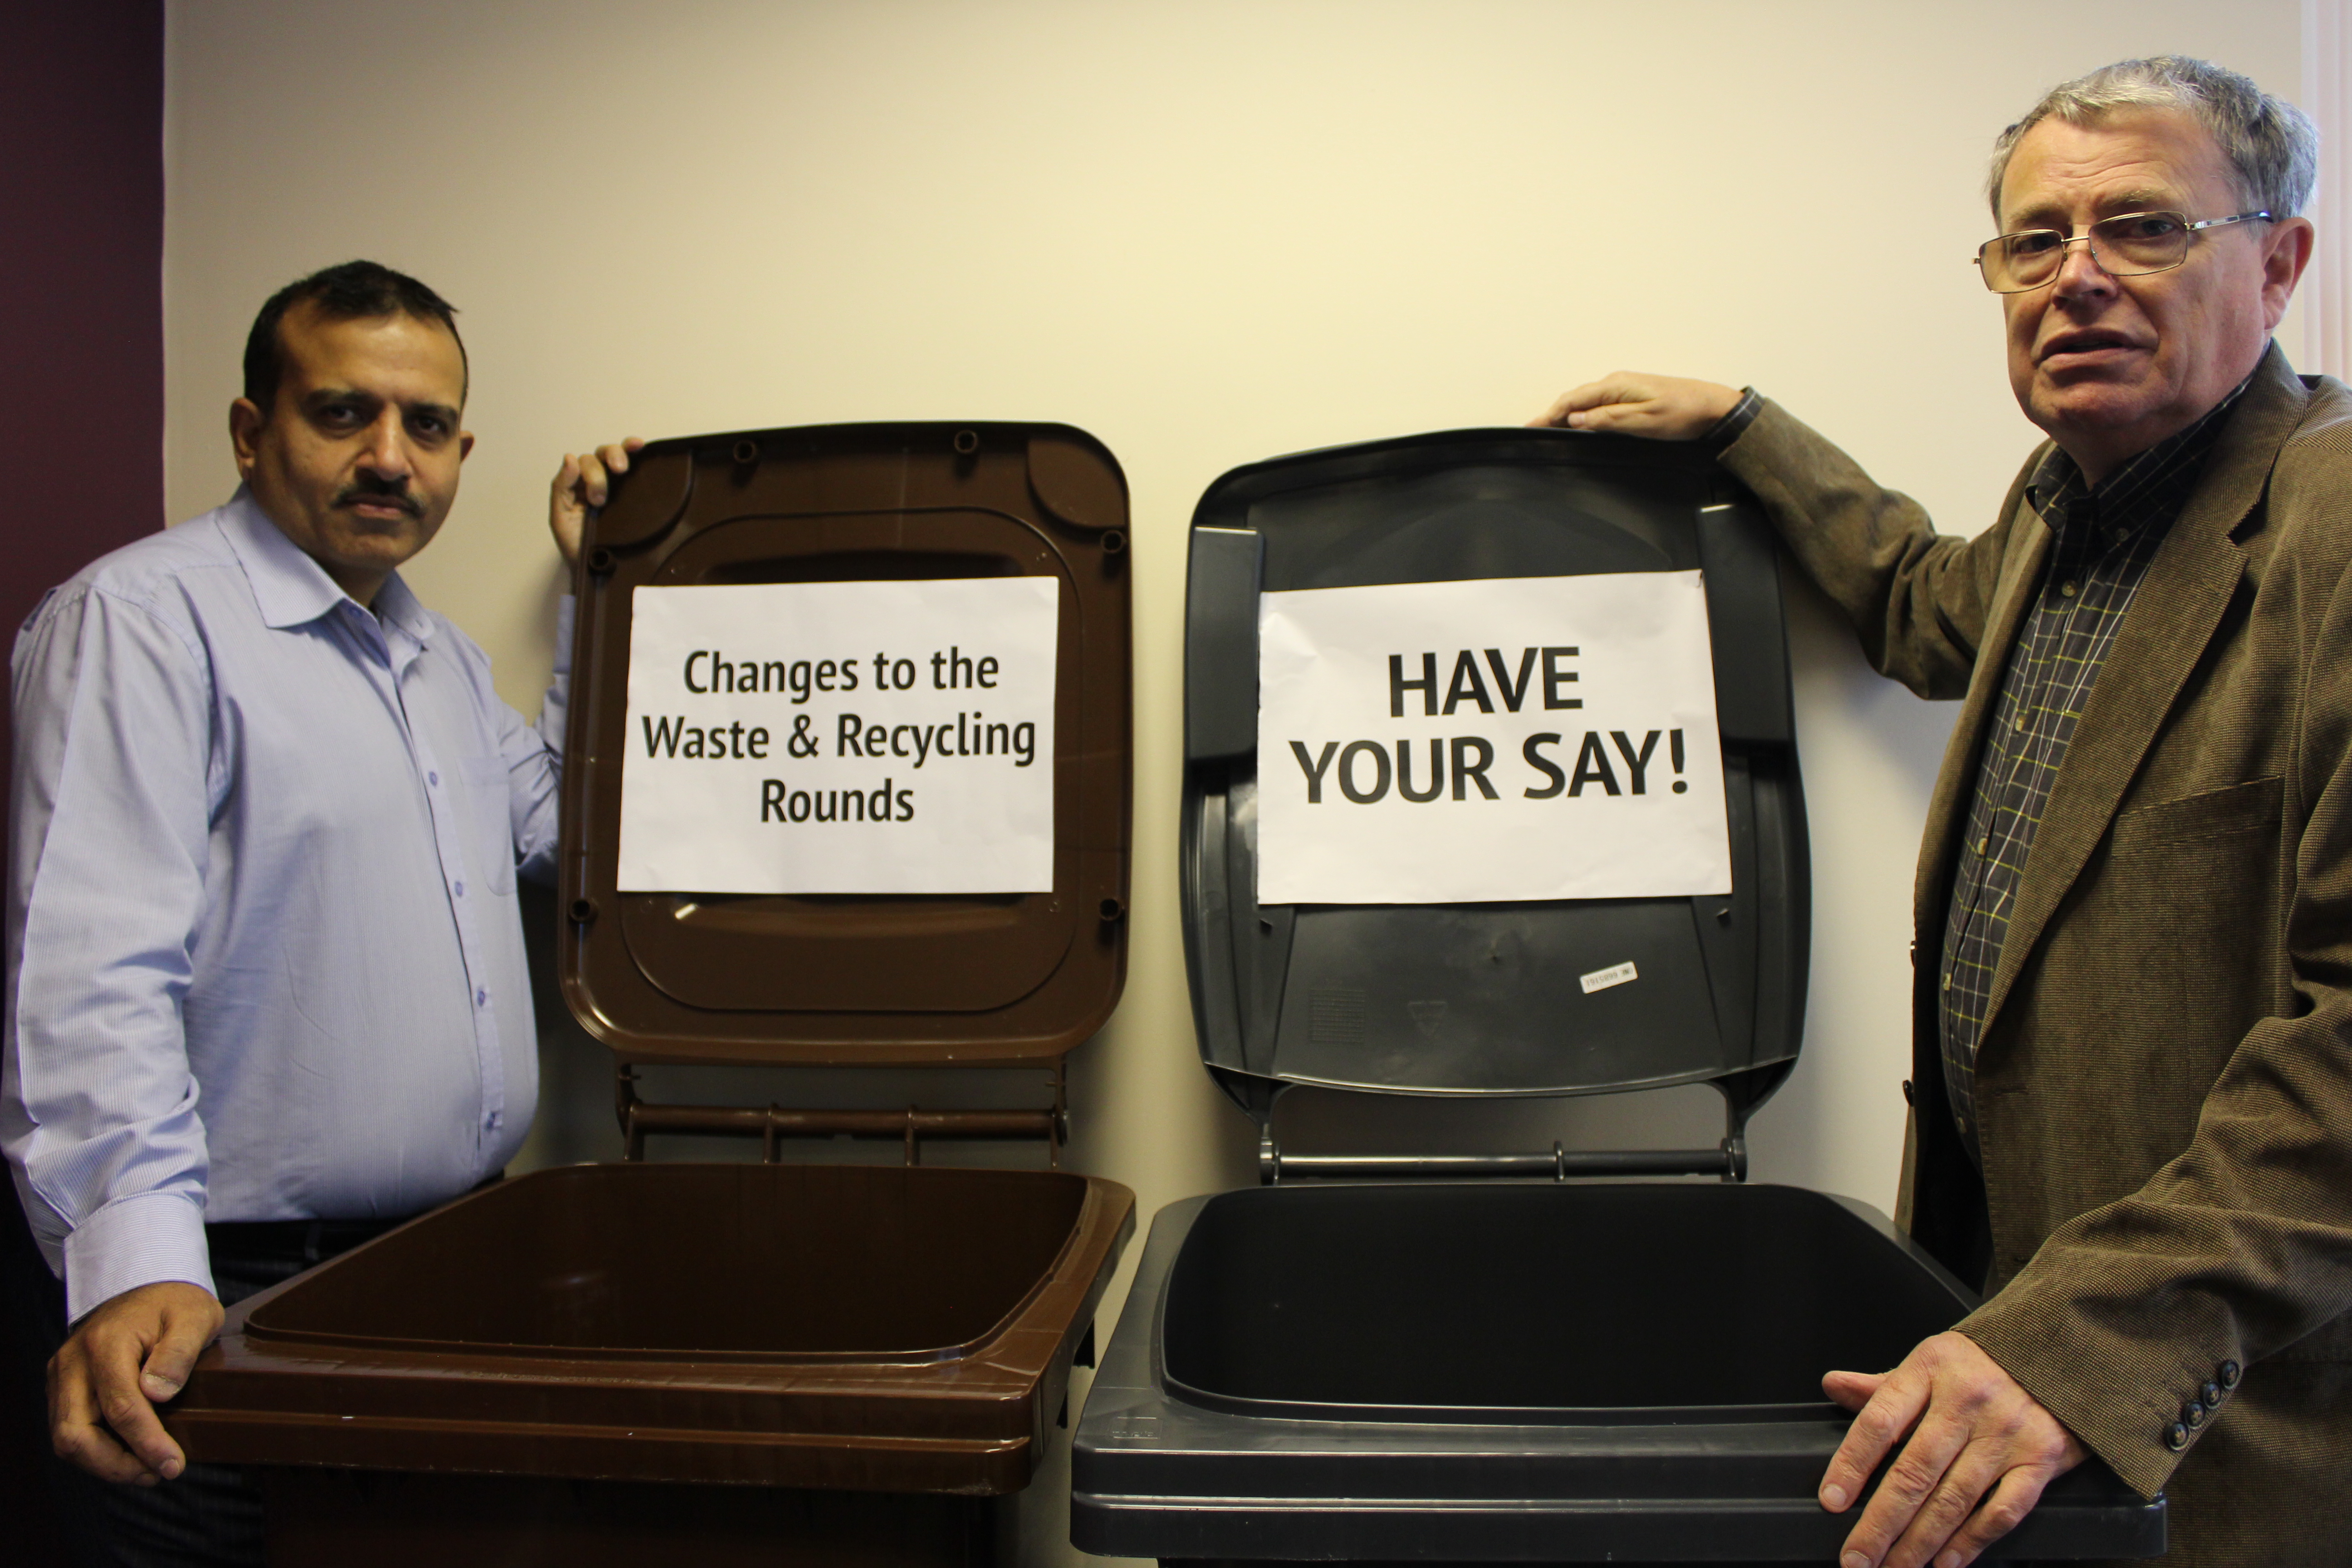 News story about proposals to change waste and recycling collections to save money.